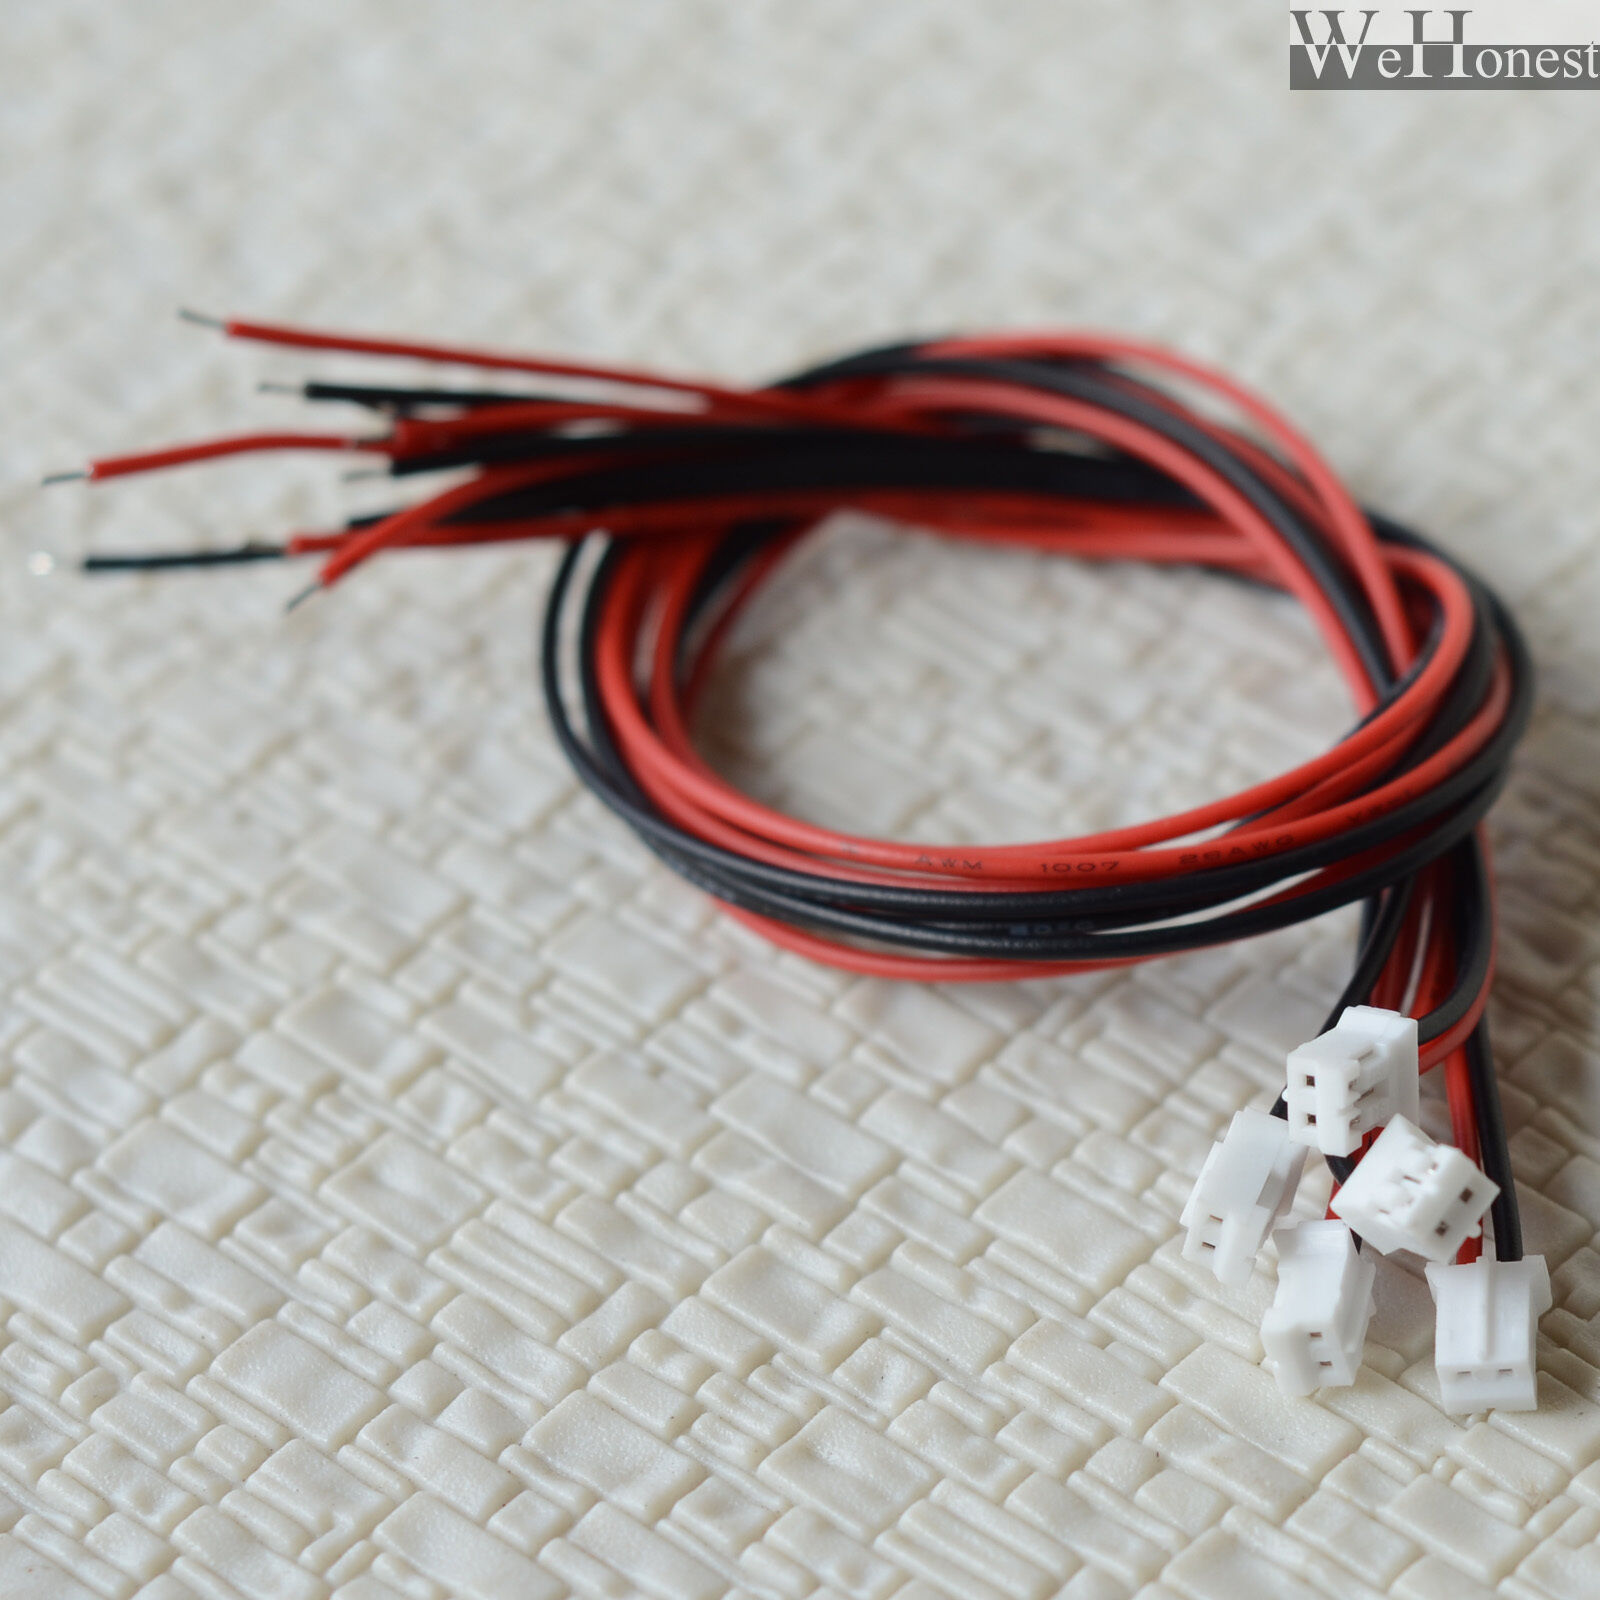 6 X Mini Plug Kits 2 Pins Jst 2.0mm Micro Connector Male With 30cm Wire Cables